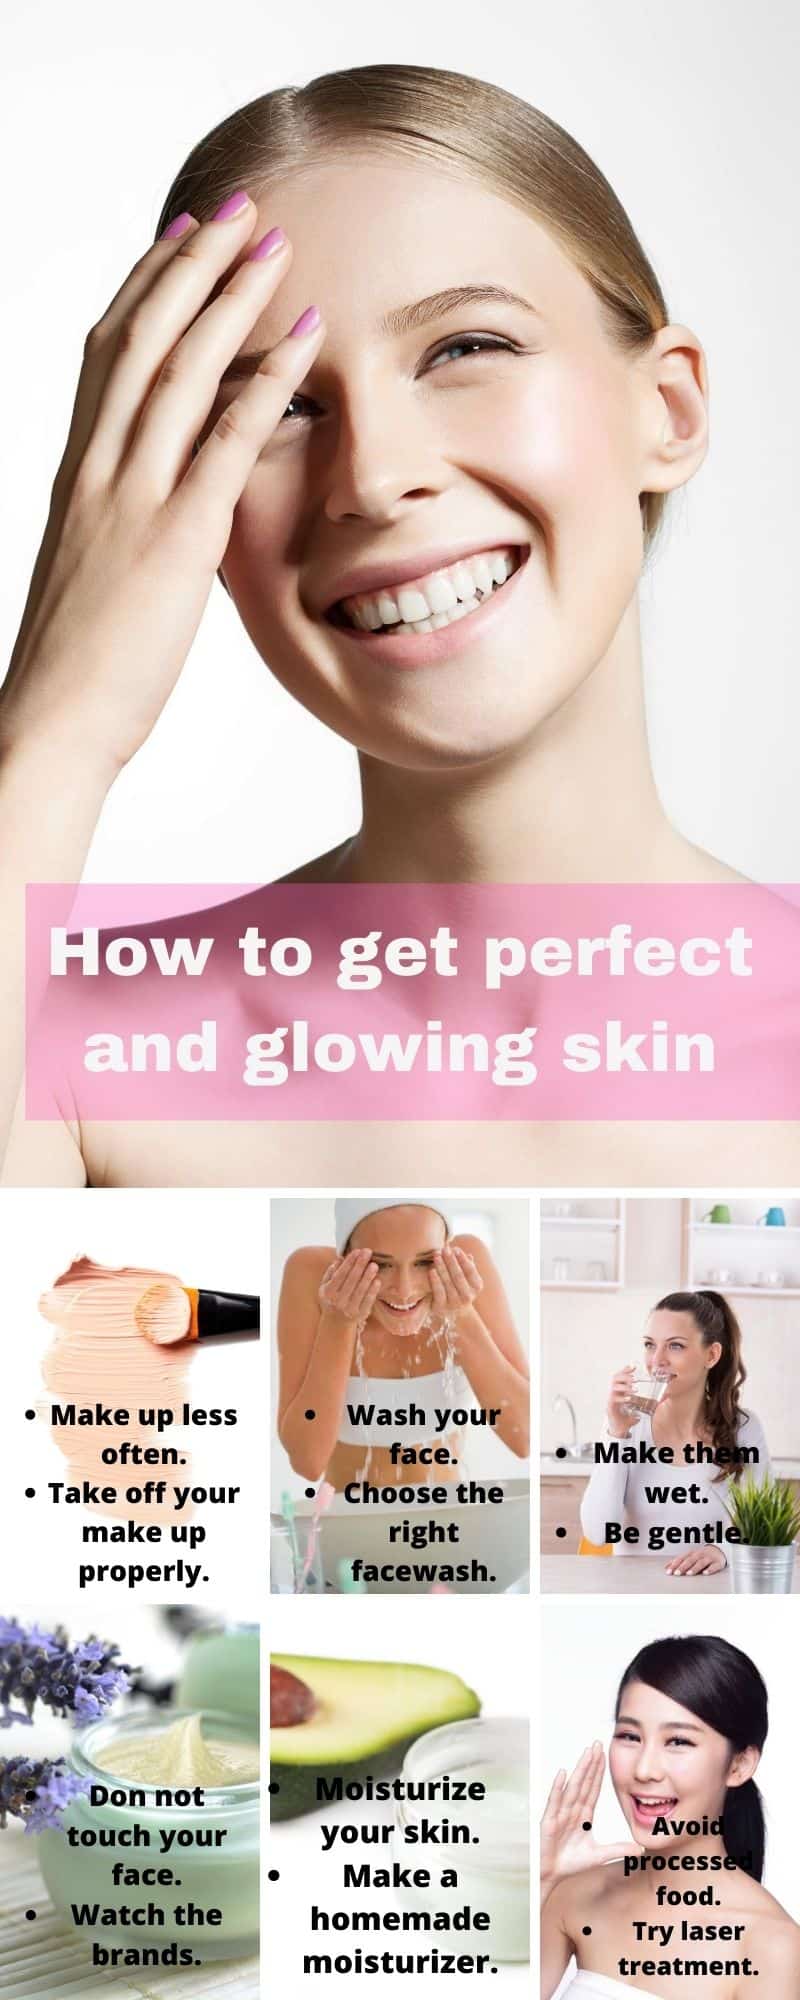 infographic of how to get a perfect glowing skin